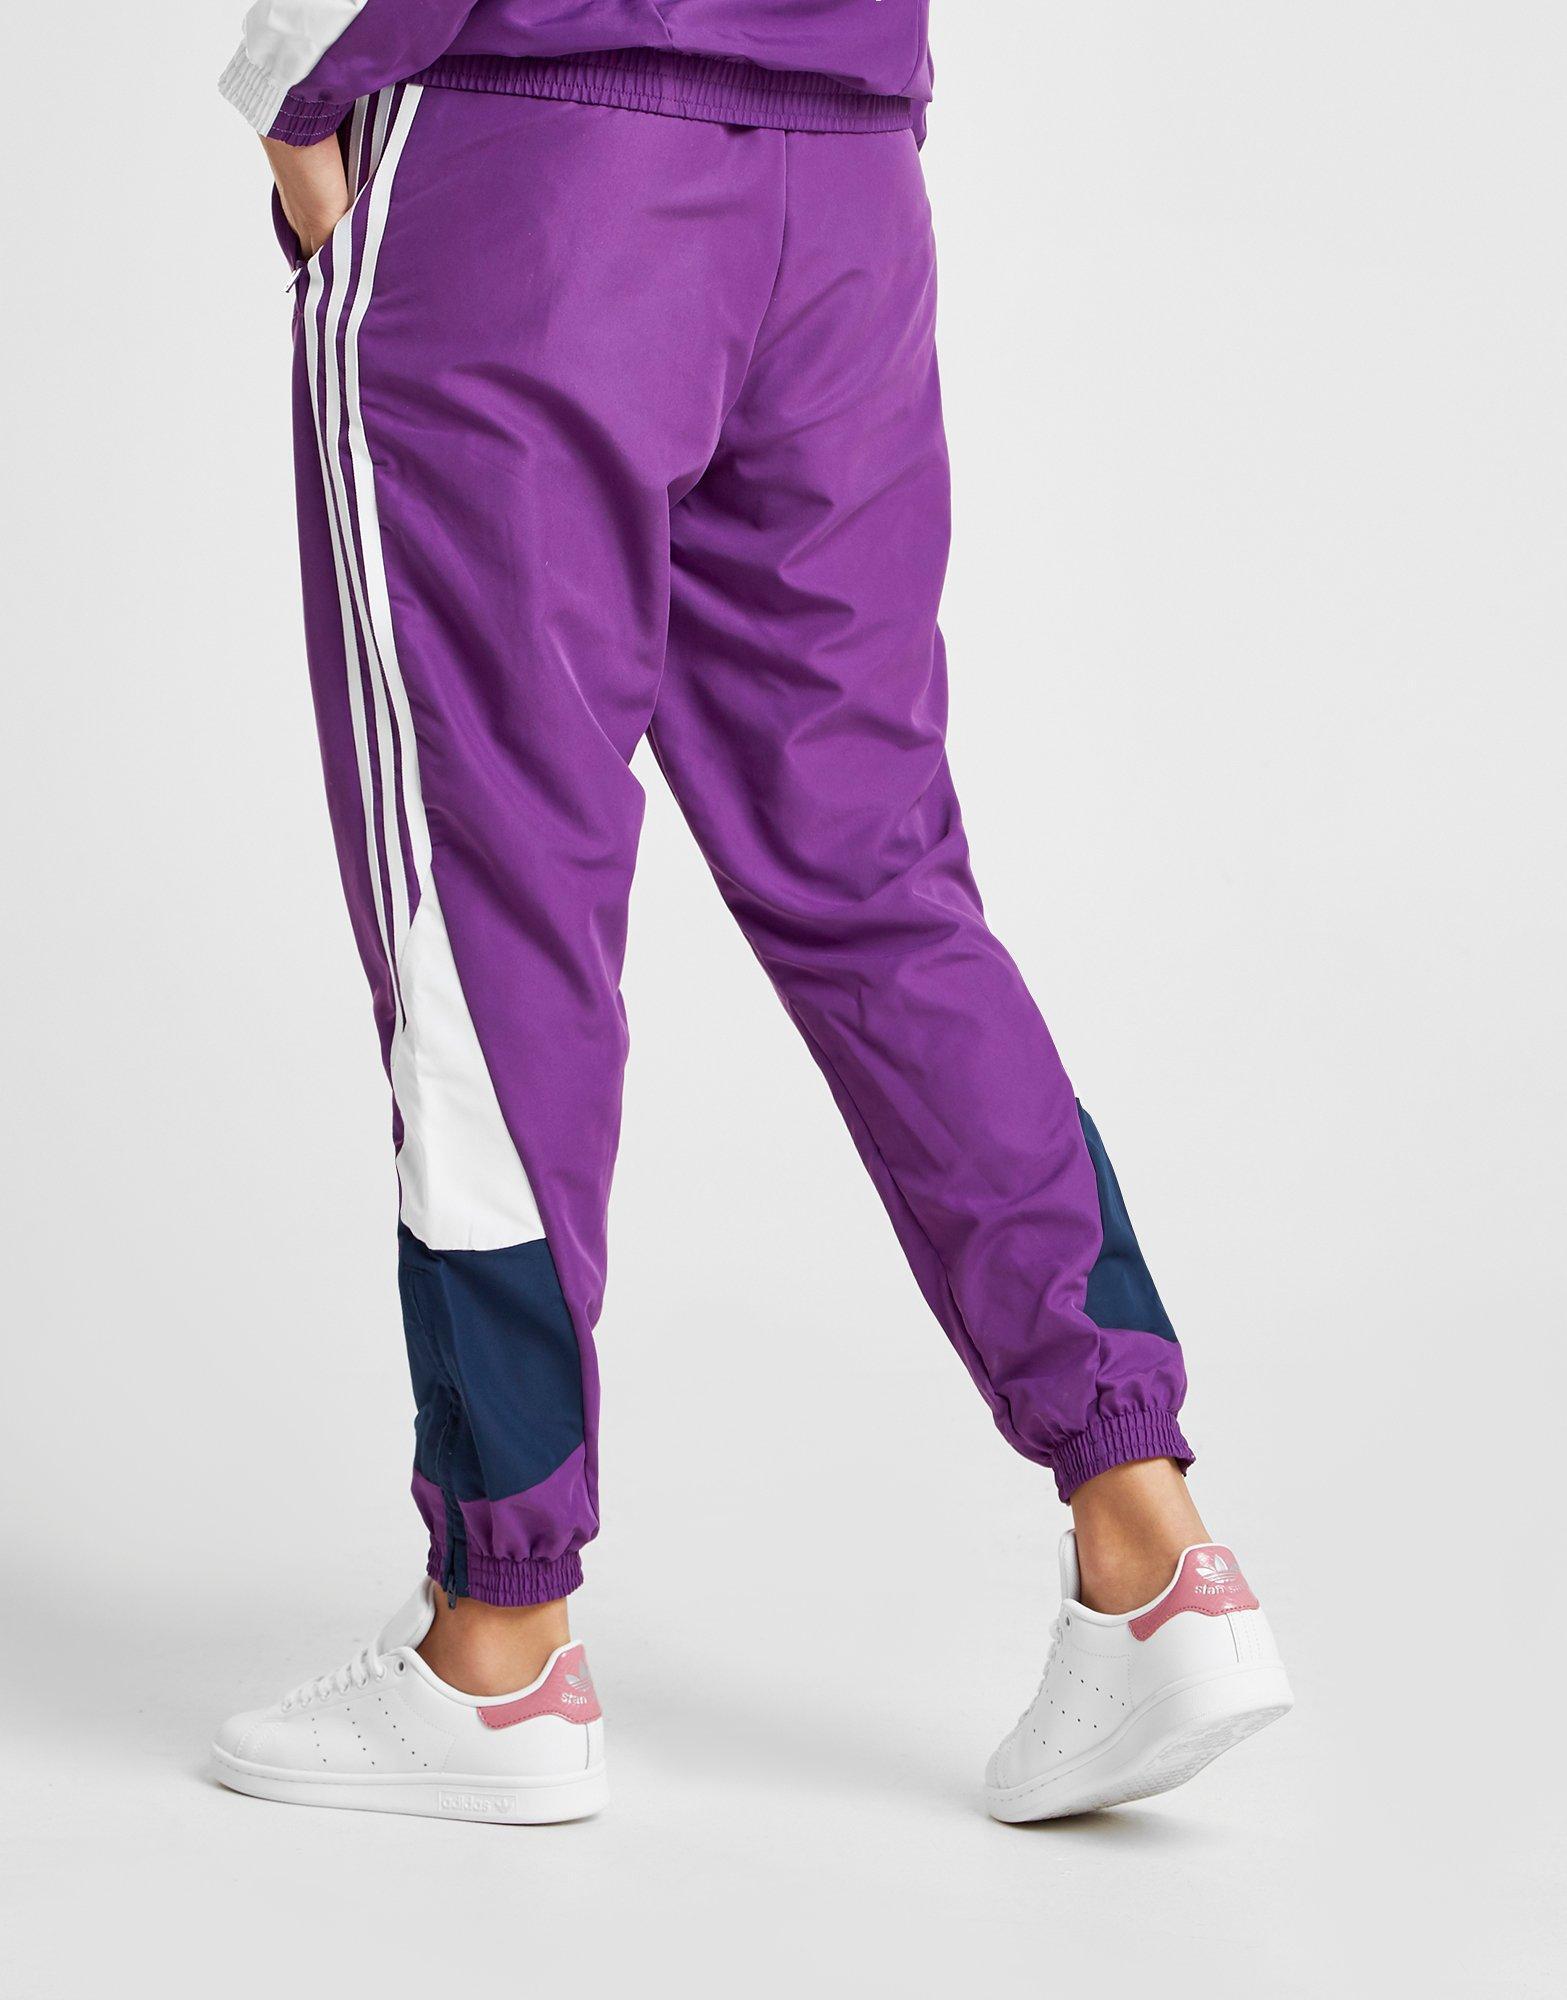 adidas Originals Synthetic 90's Colour Block Woven Track Pants in